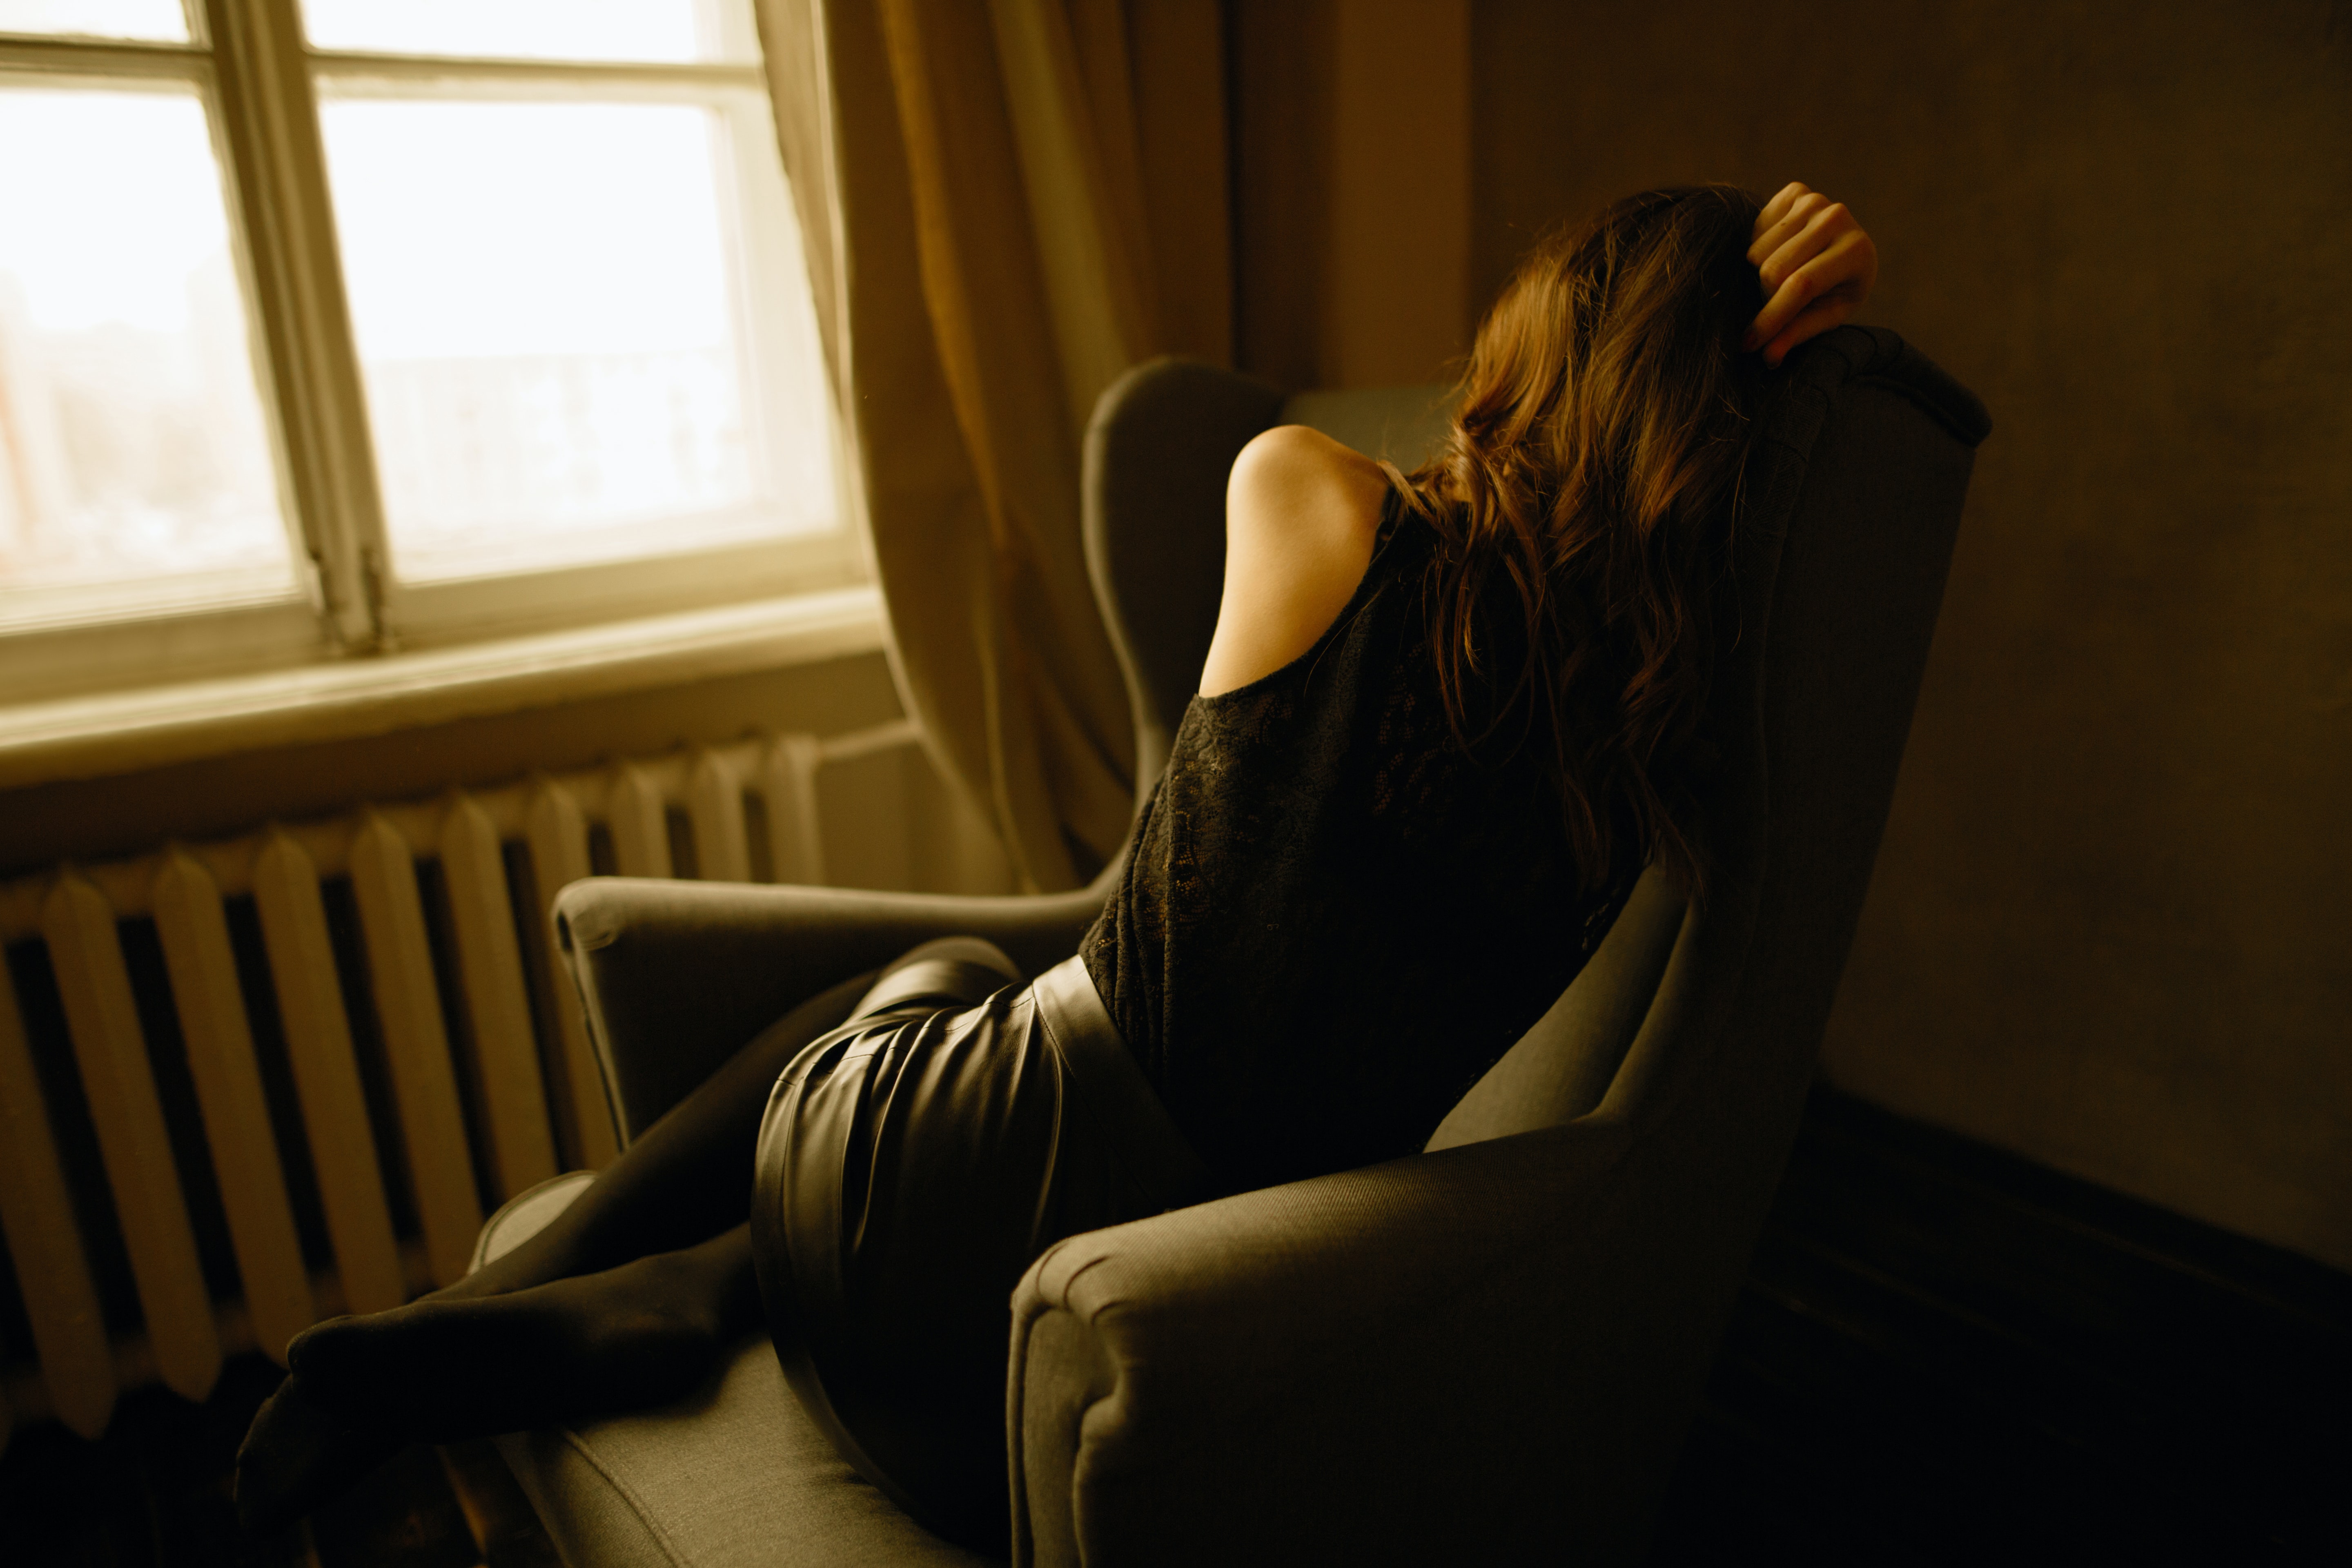 A woman suffering from fatigue lays motionless on a chair while being exhausted.